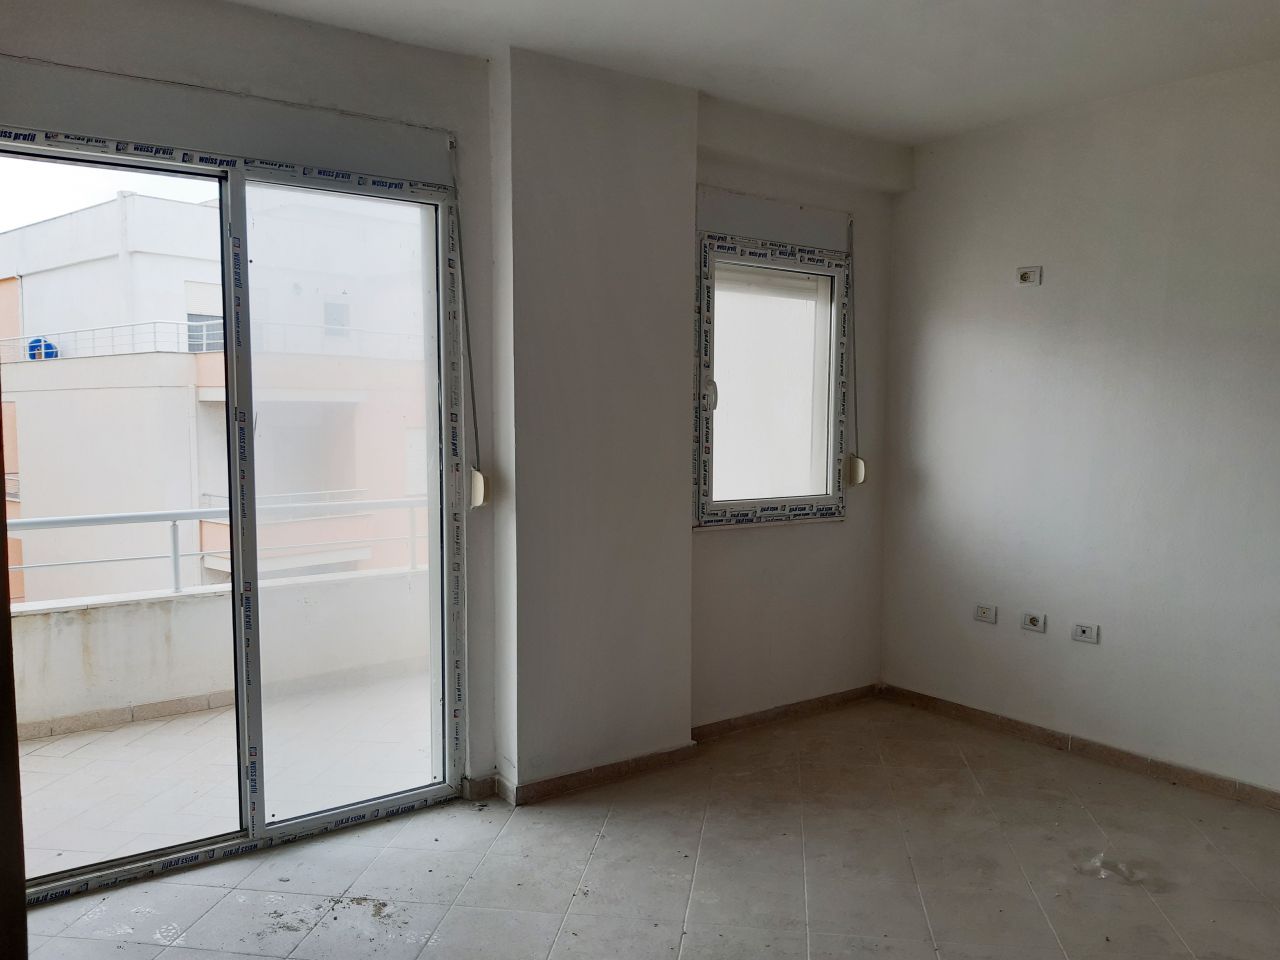 Apartments in Durres. Apartments Close to Beach